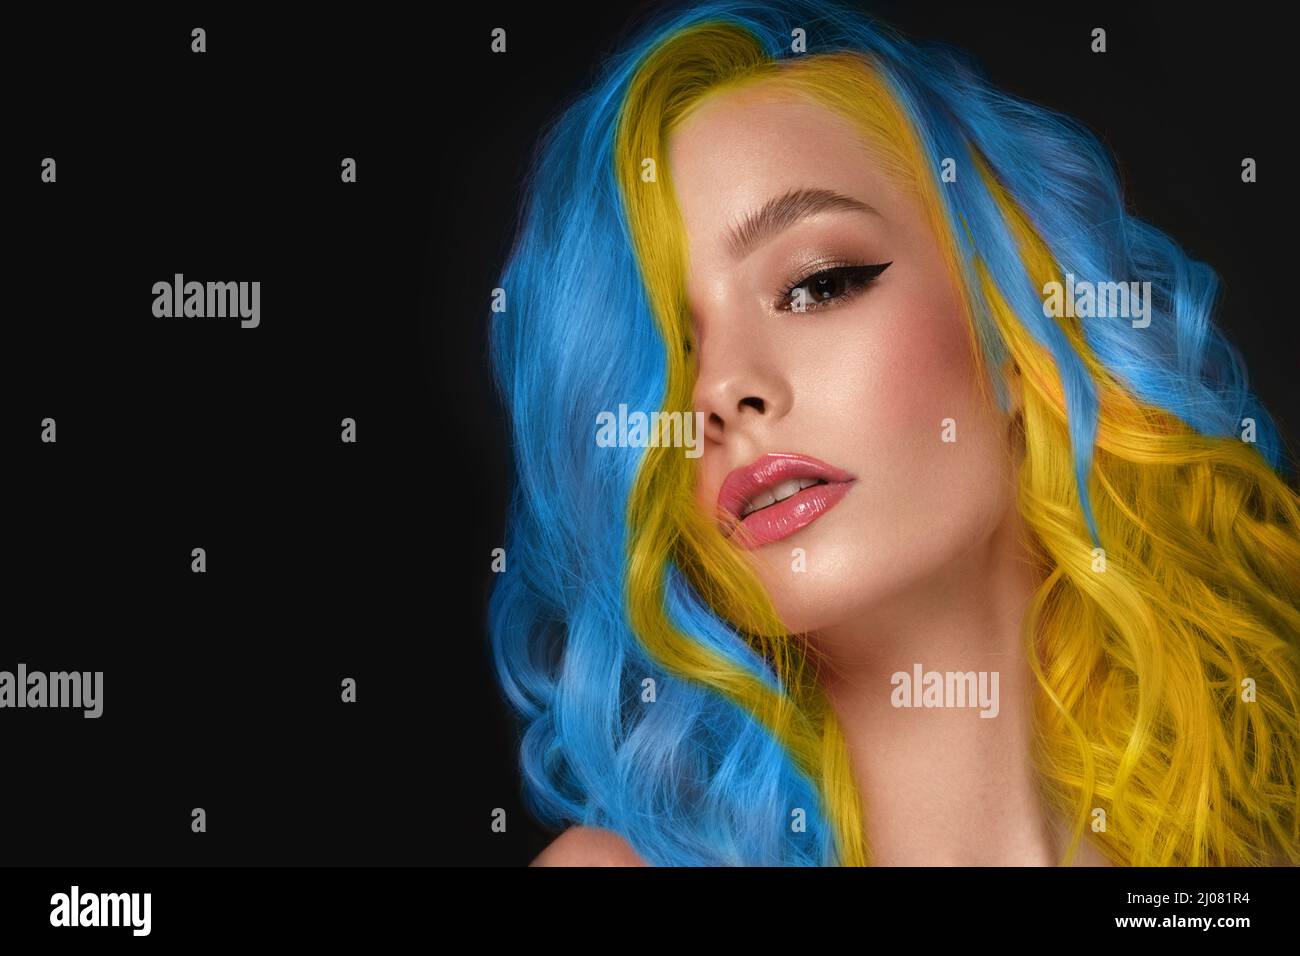 Blue and yellow hair dye techniques - wide 8